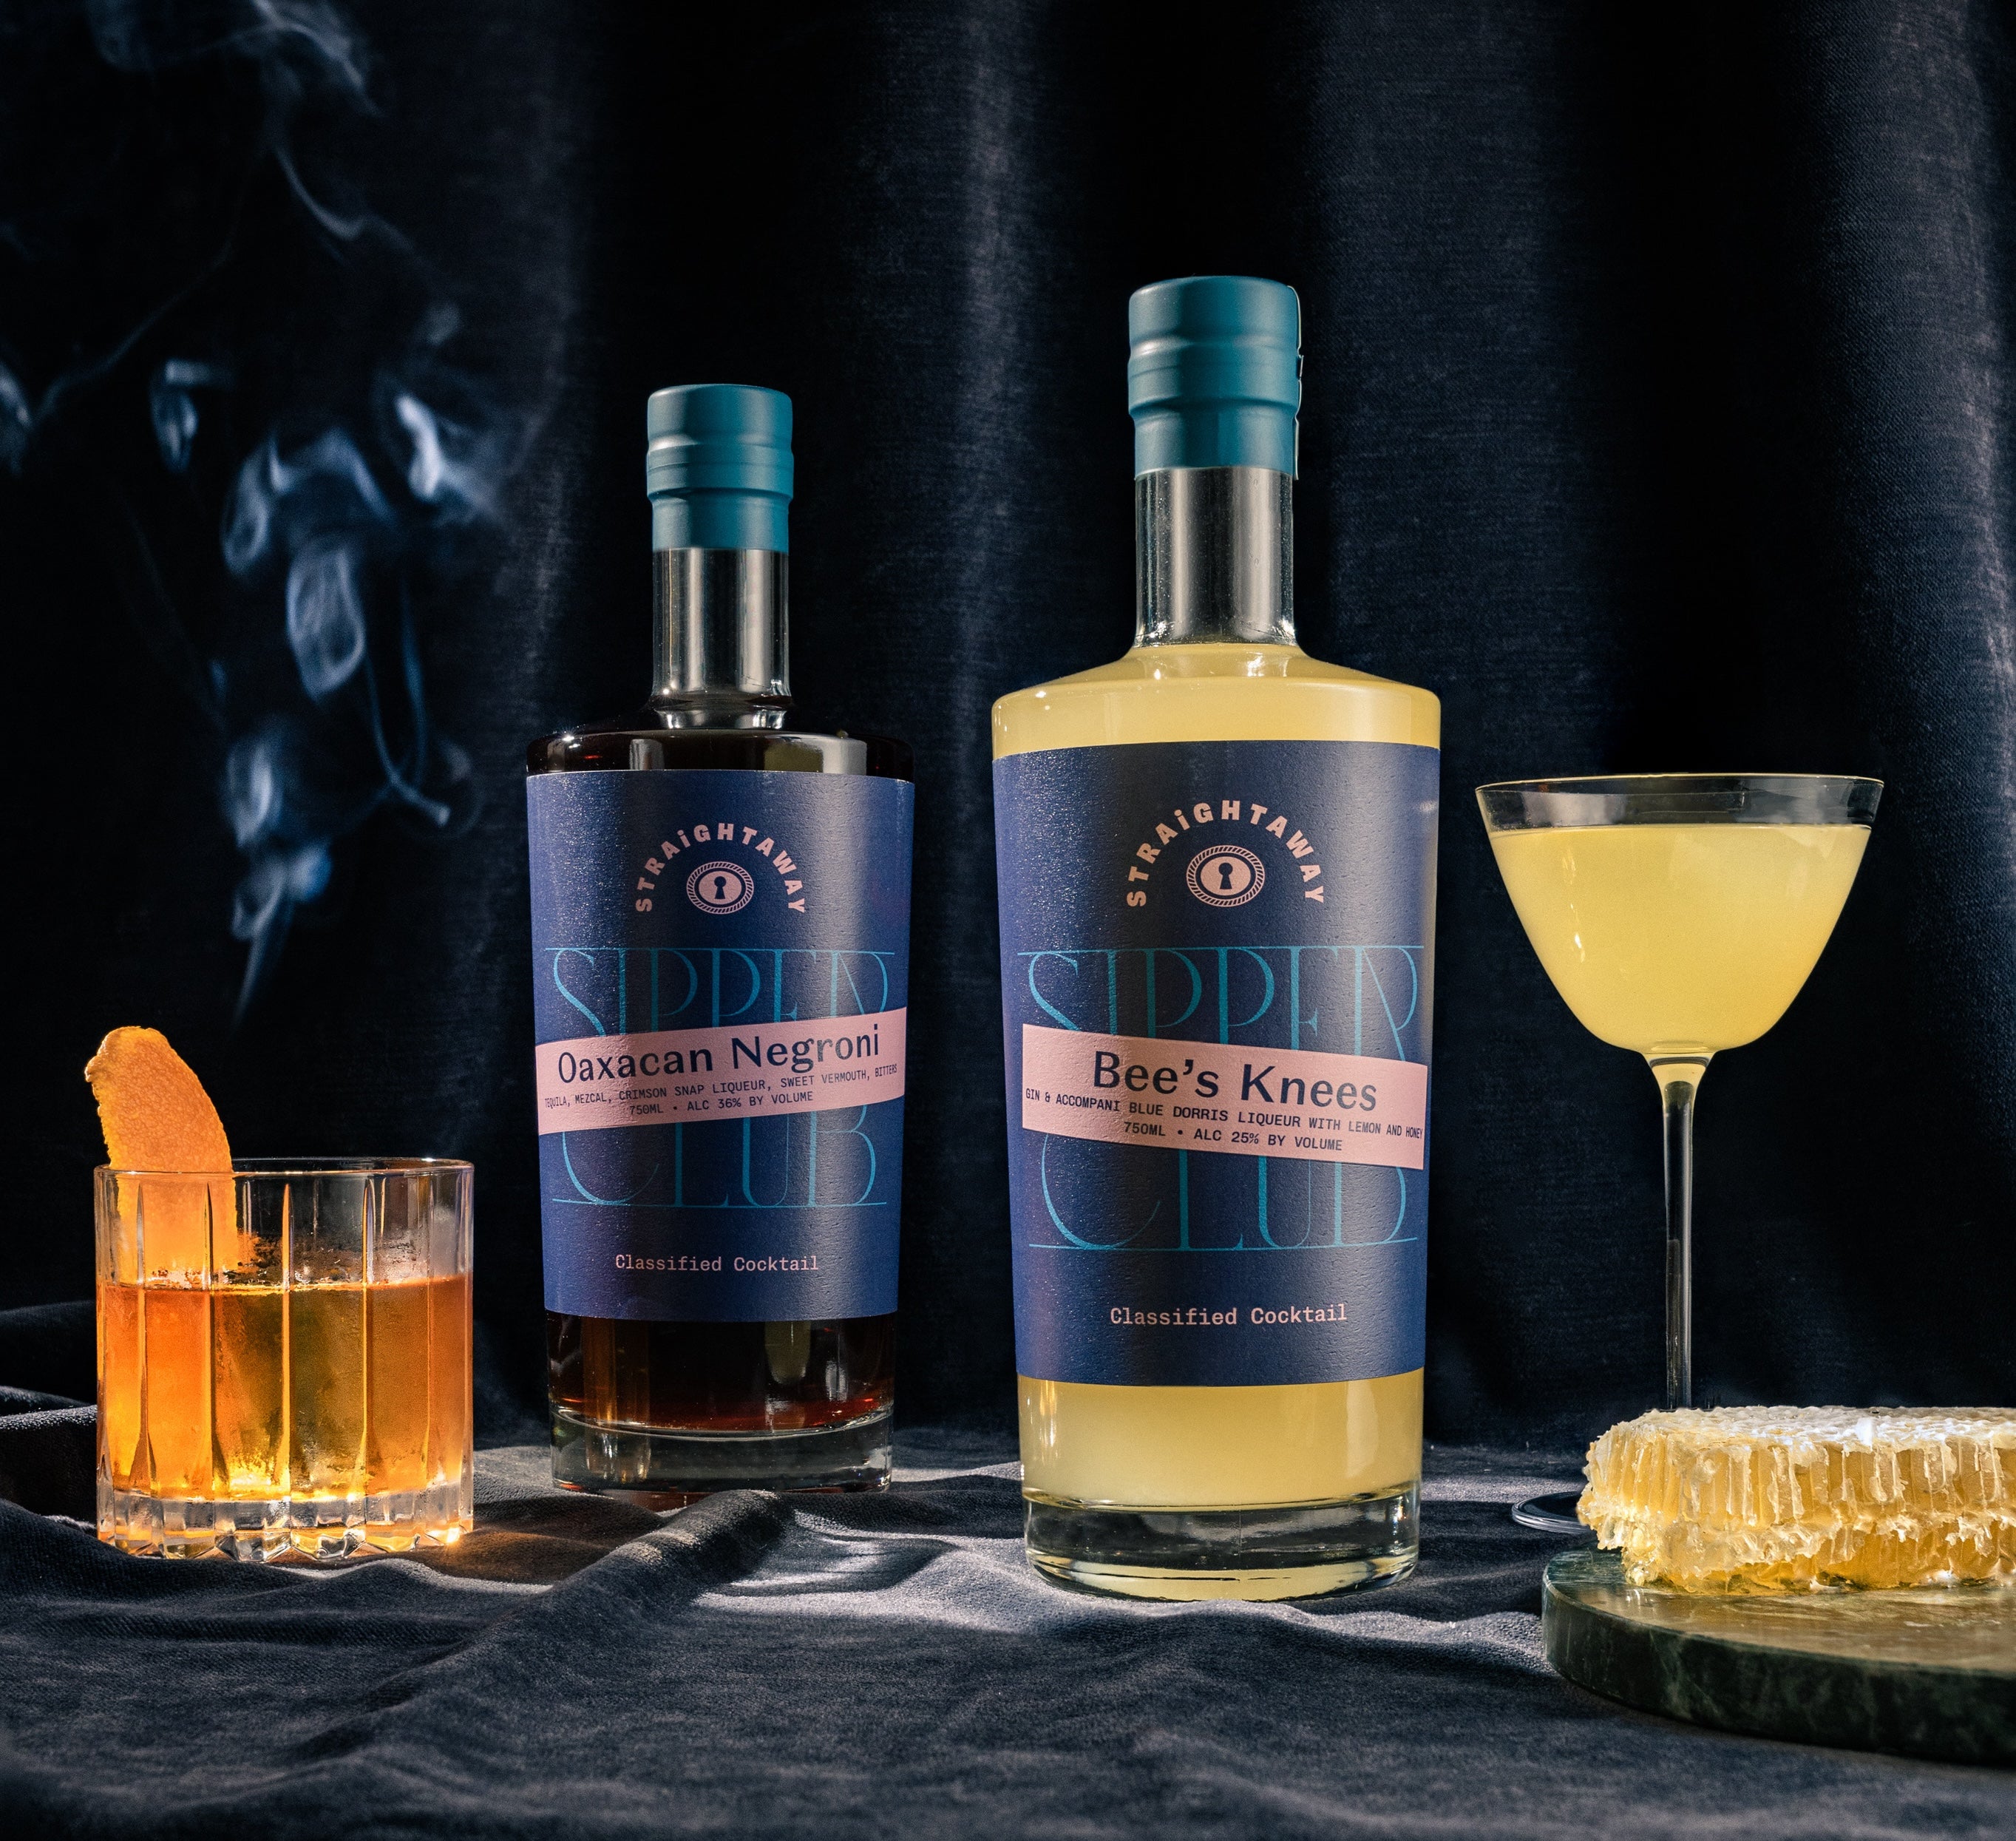 Our cocktail membership features two exclusive cocktail bottles, one previous release included Bees Knees and Oaxaca Negroni